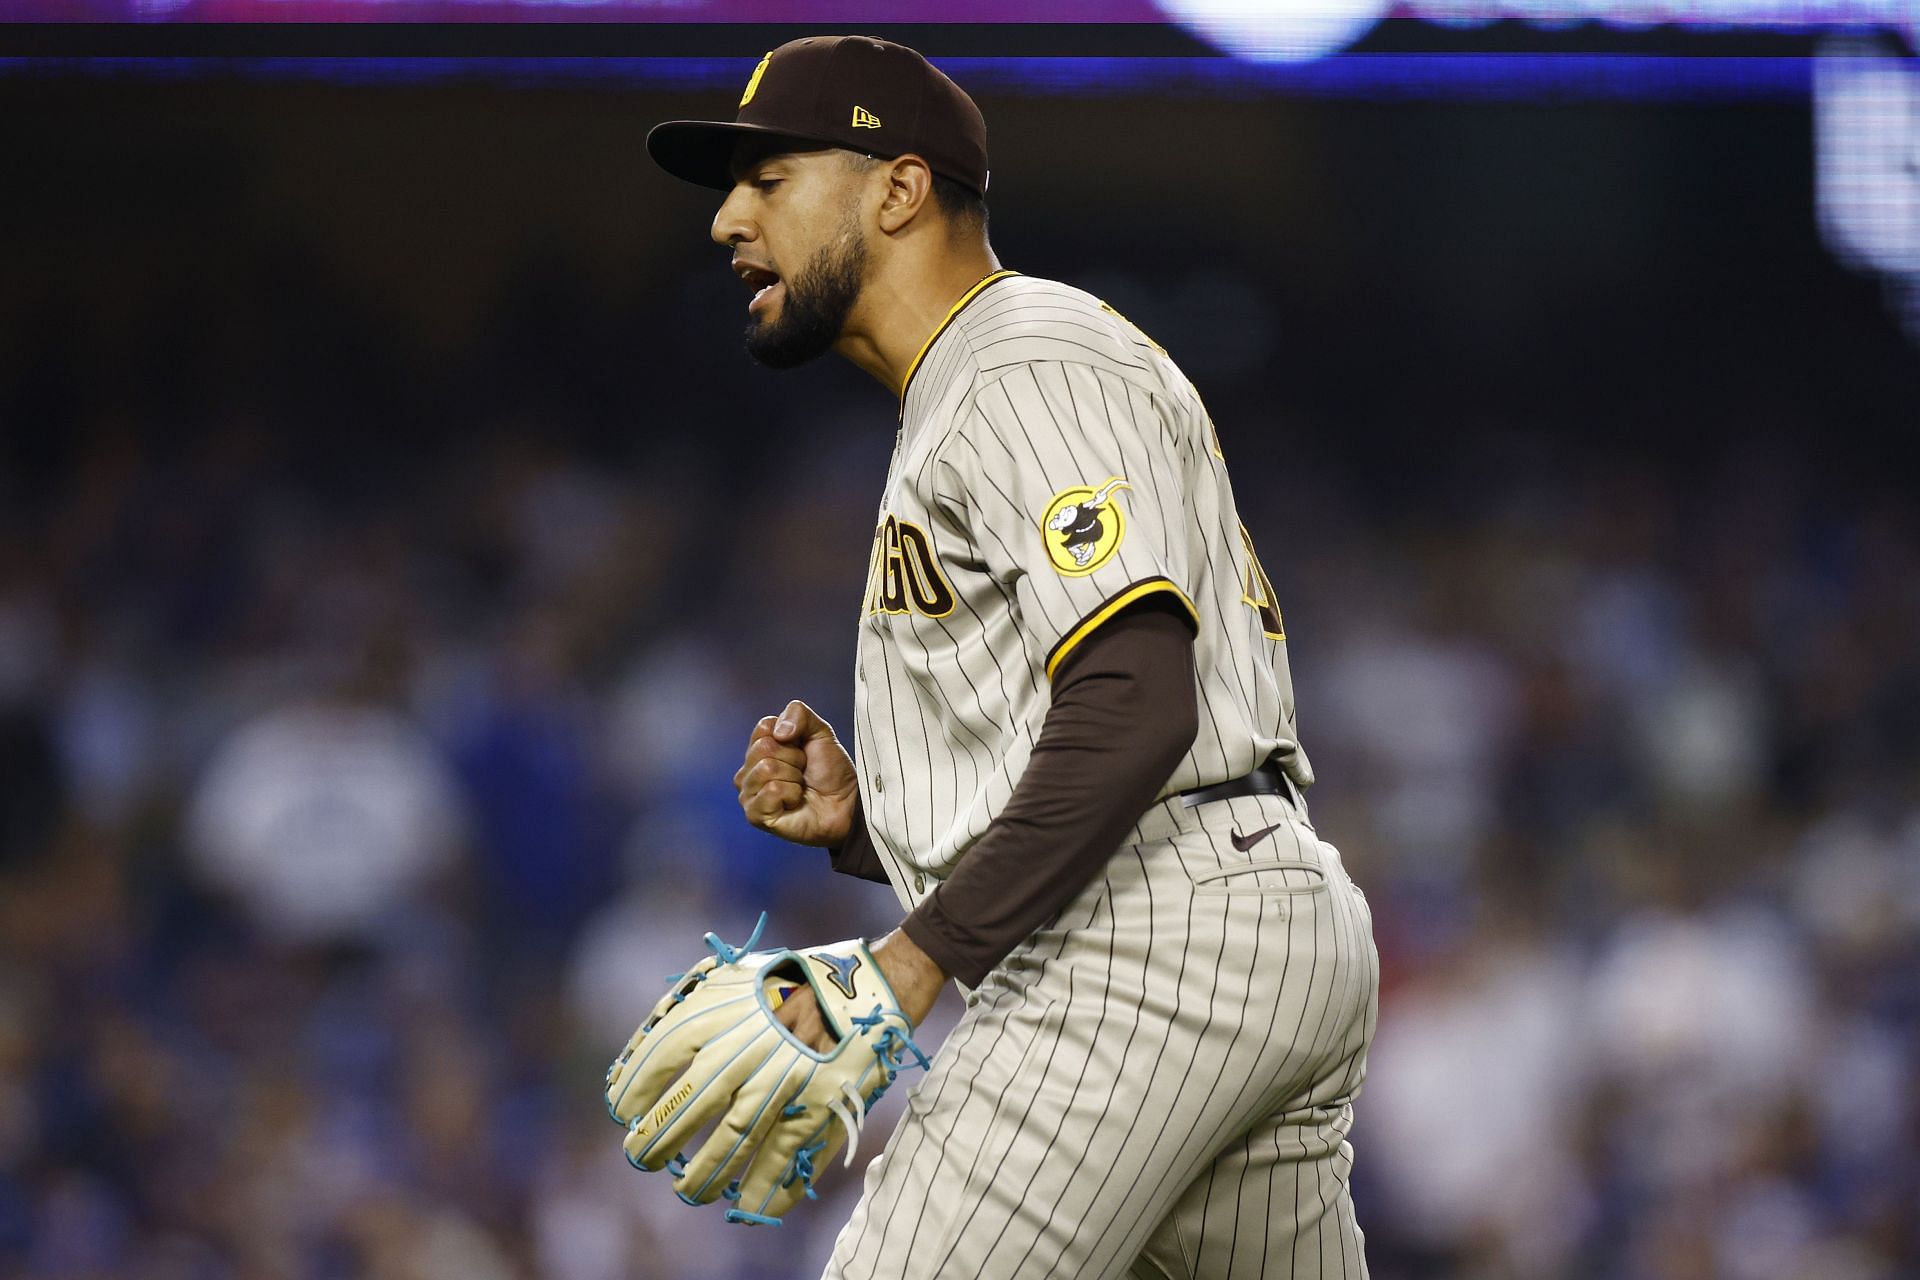 San Diego Padres - Big Game Bob is BACK 👏 The #Padres have signed Robert  Suarez to a five-year contract through the 2027 season. Details:  atmlb.com/3EFCjrr